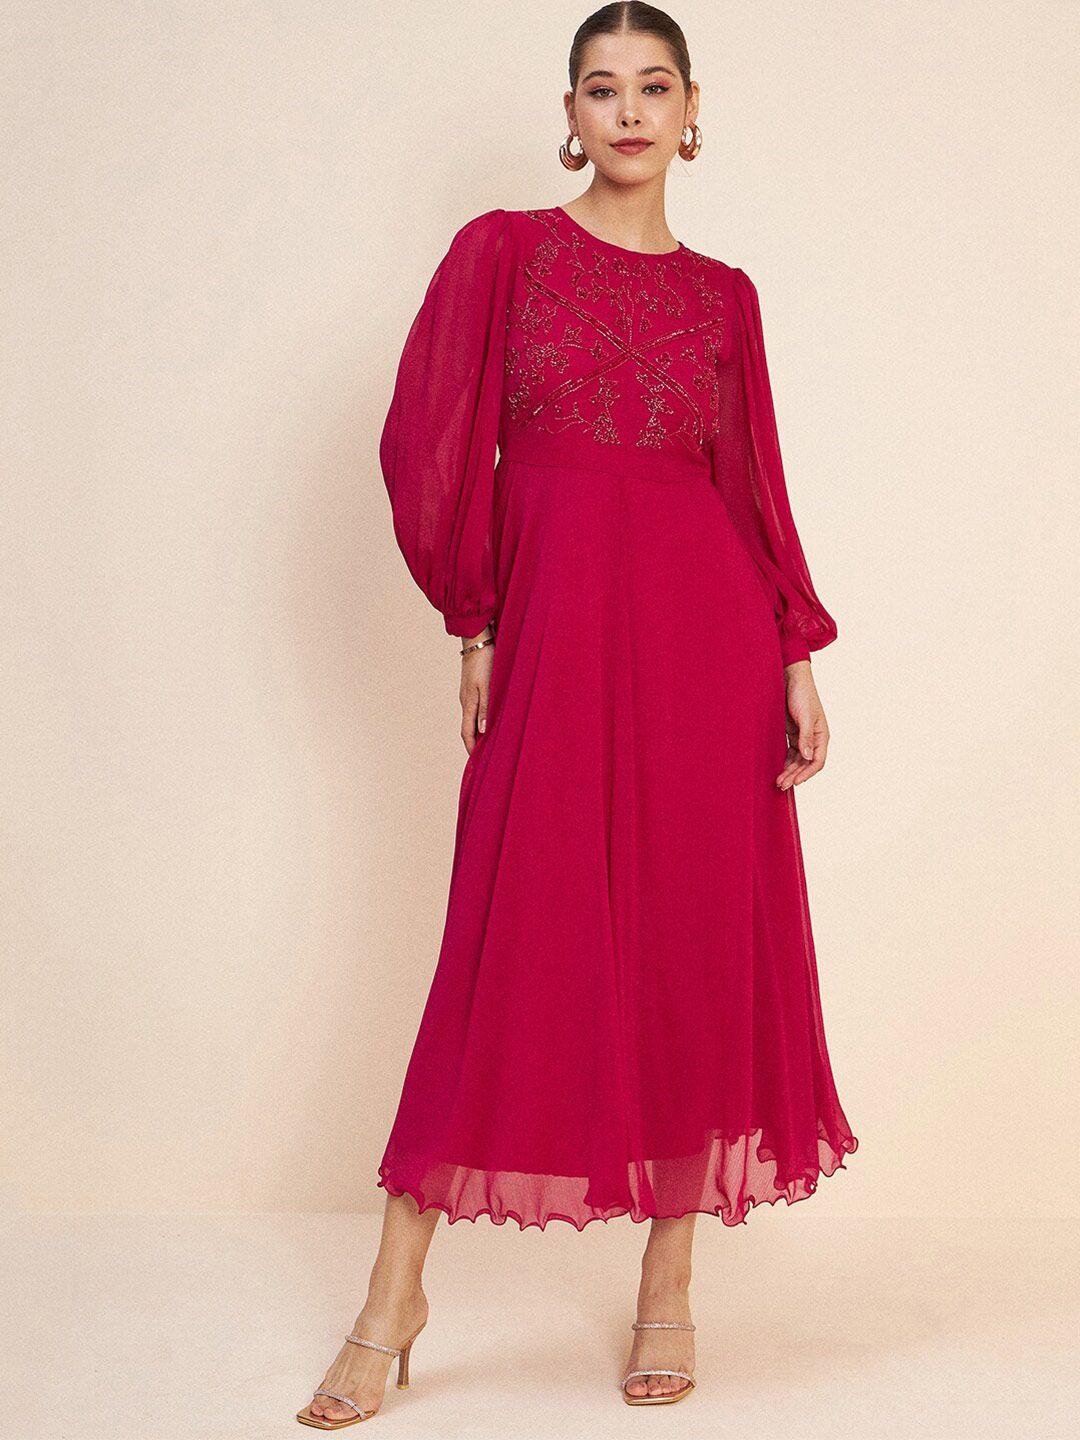 antheaa pink puff sleeve embellished detail fit & flare dress